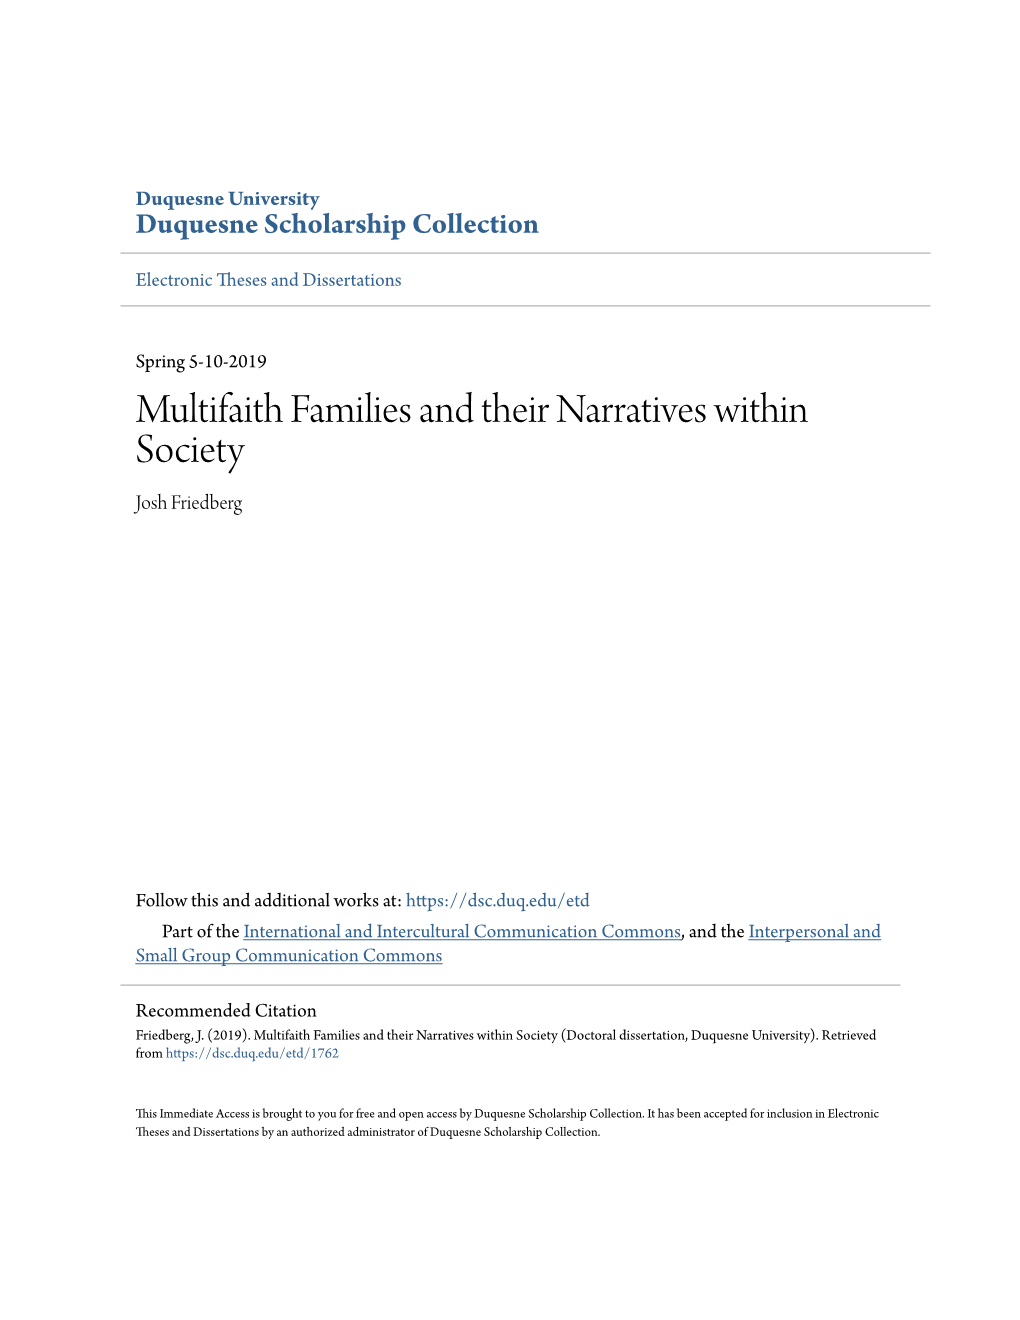 Multifaith Families and Their Narratives Within Society Josh Friedberg